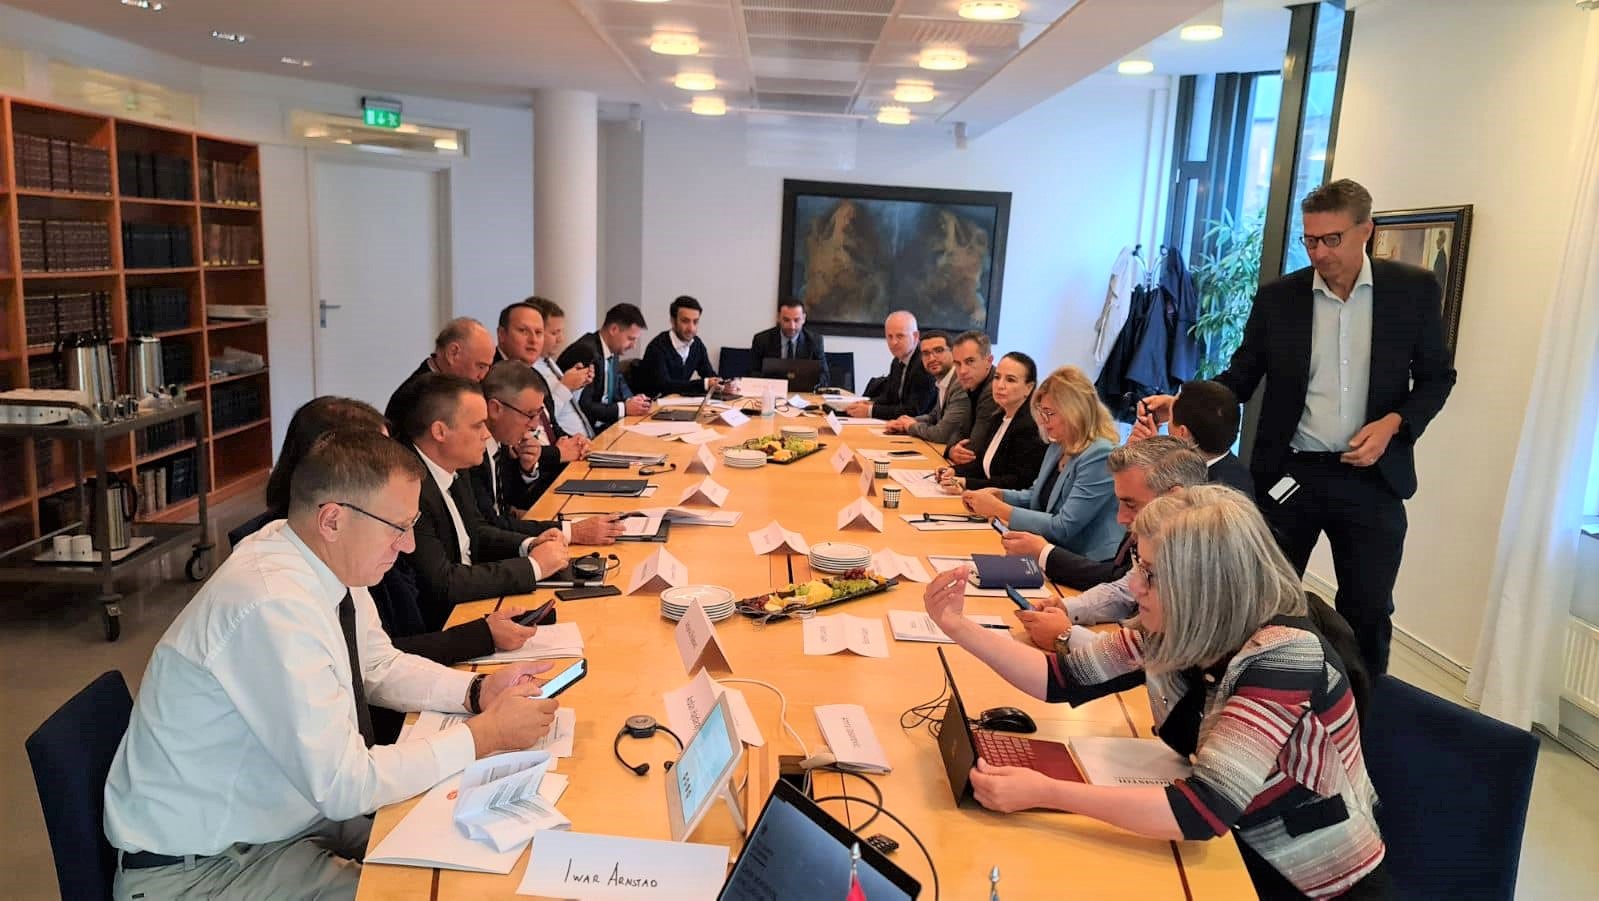 Representatives of the prosecutorial system visit the District Court in Oslo